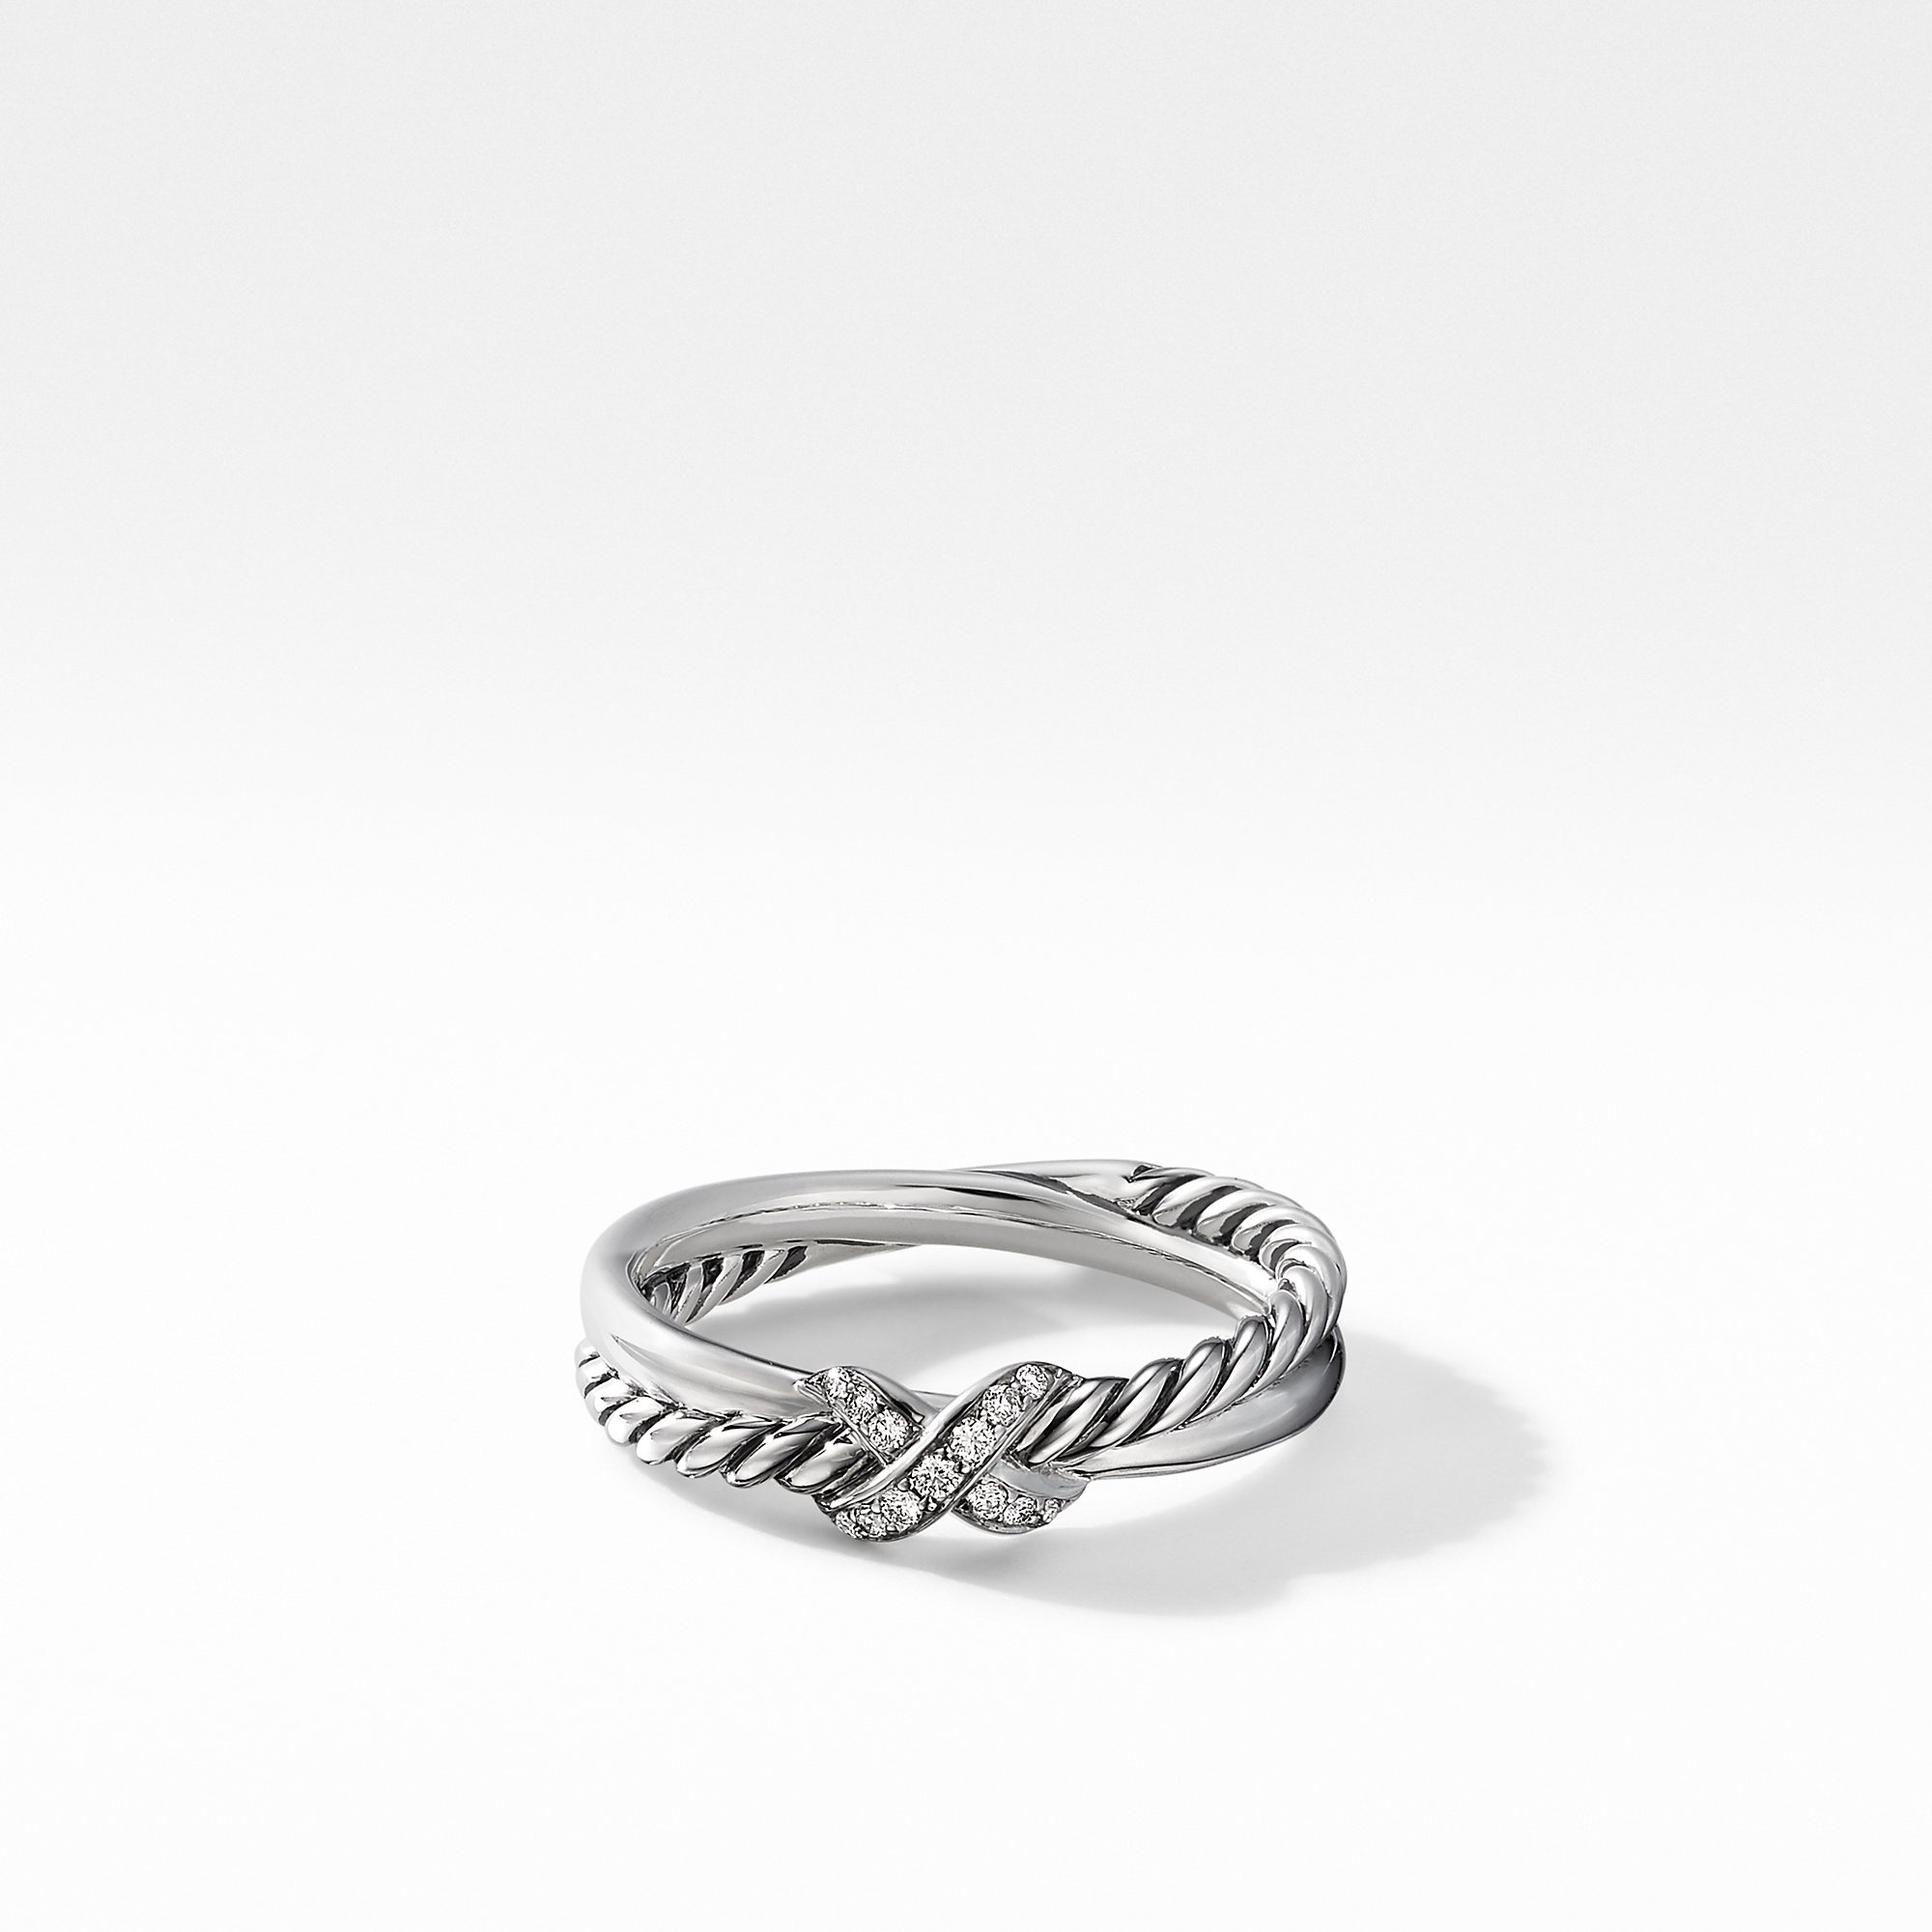 Petite X Ring in Sterling Silver with Diamonds, 4mm